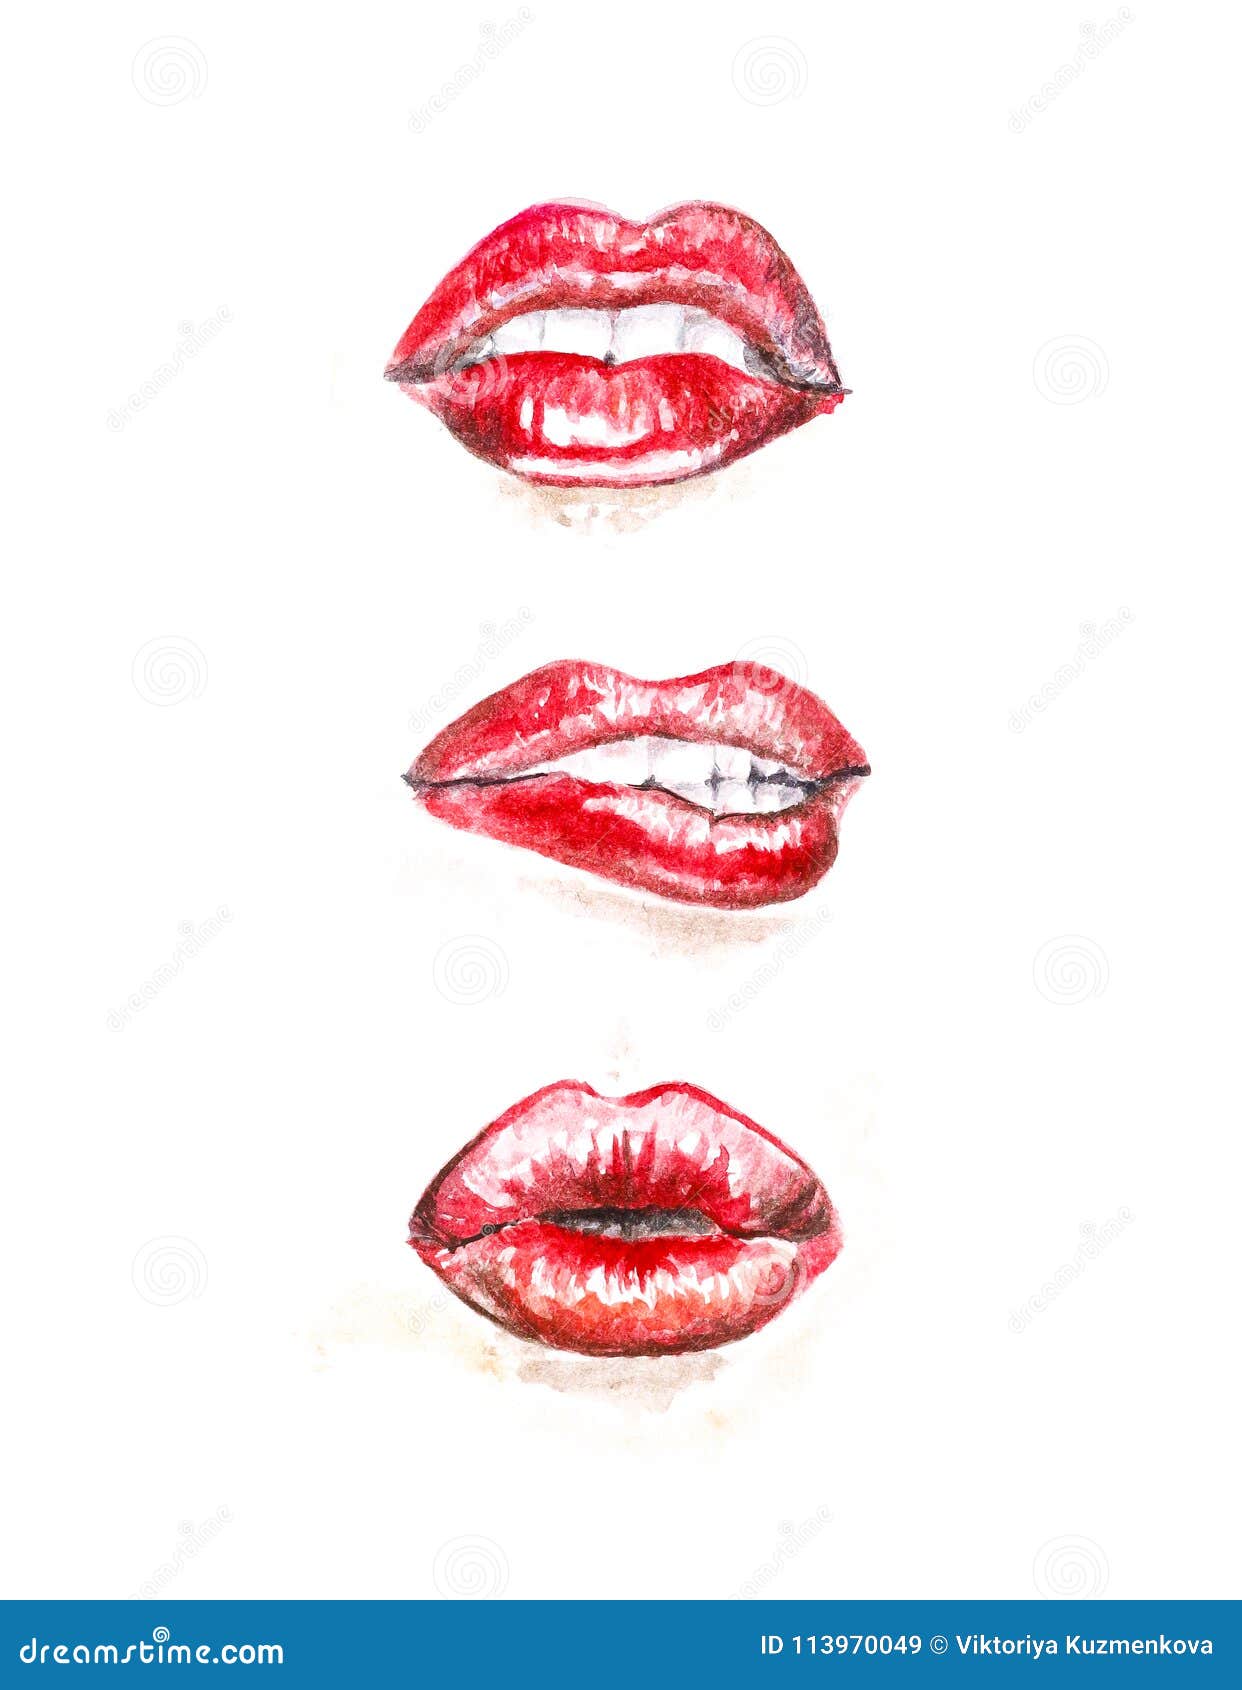 500+ Red Lips Pictures [HD] | Download Free Images on Unsplash